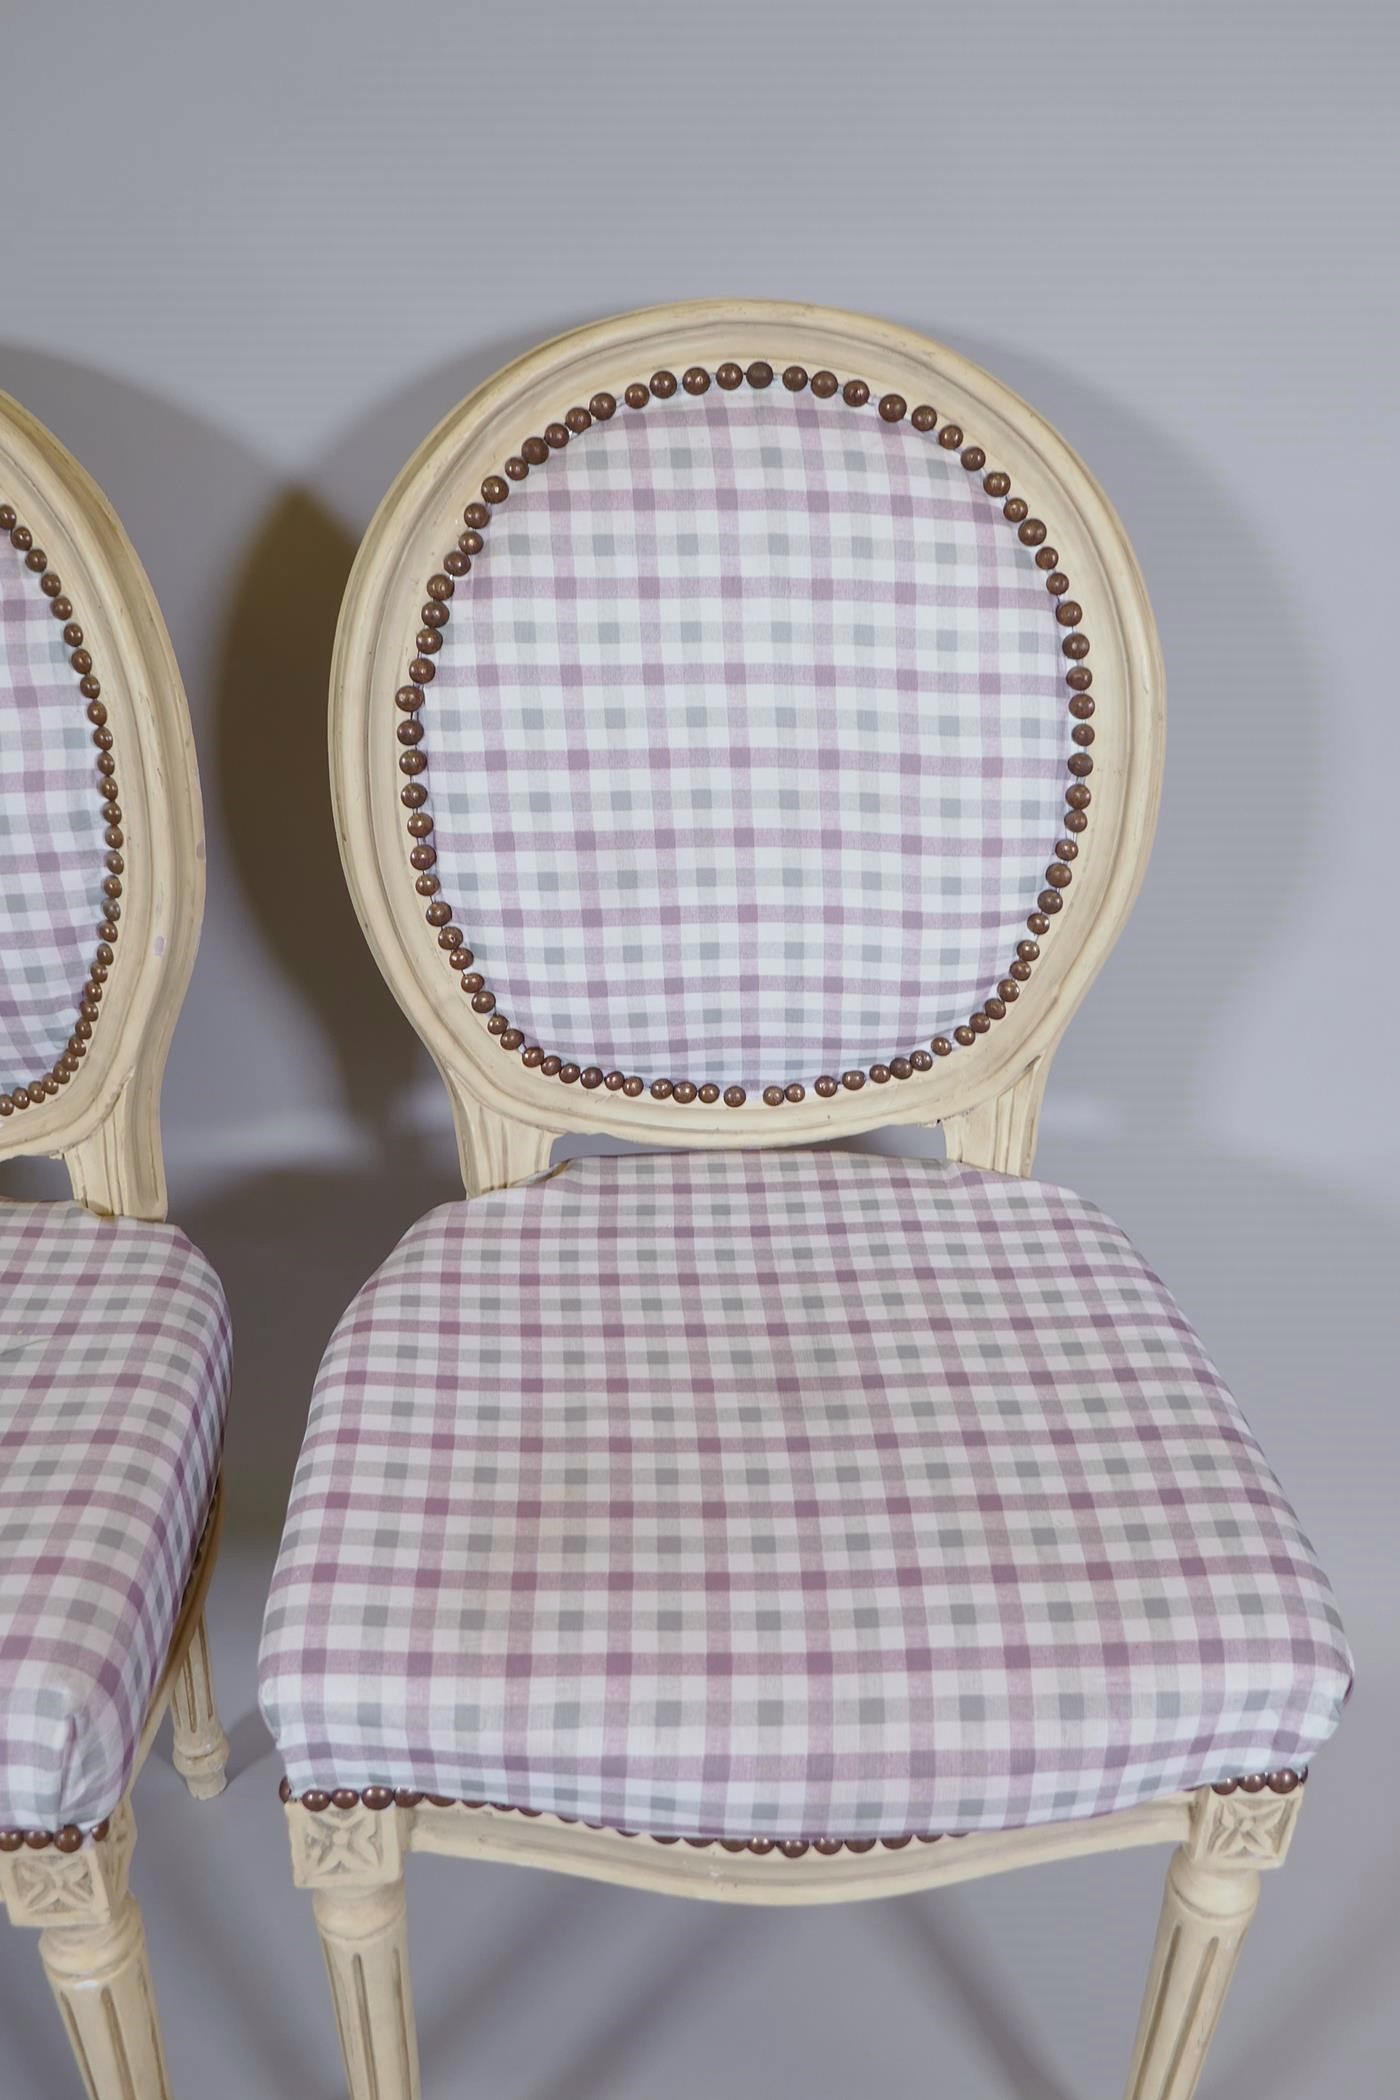 A pair of Victorian style balloon back chars with painted frames and Gingham upholstery - Image 2 of 2